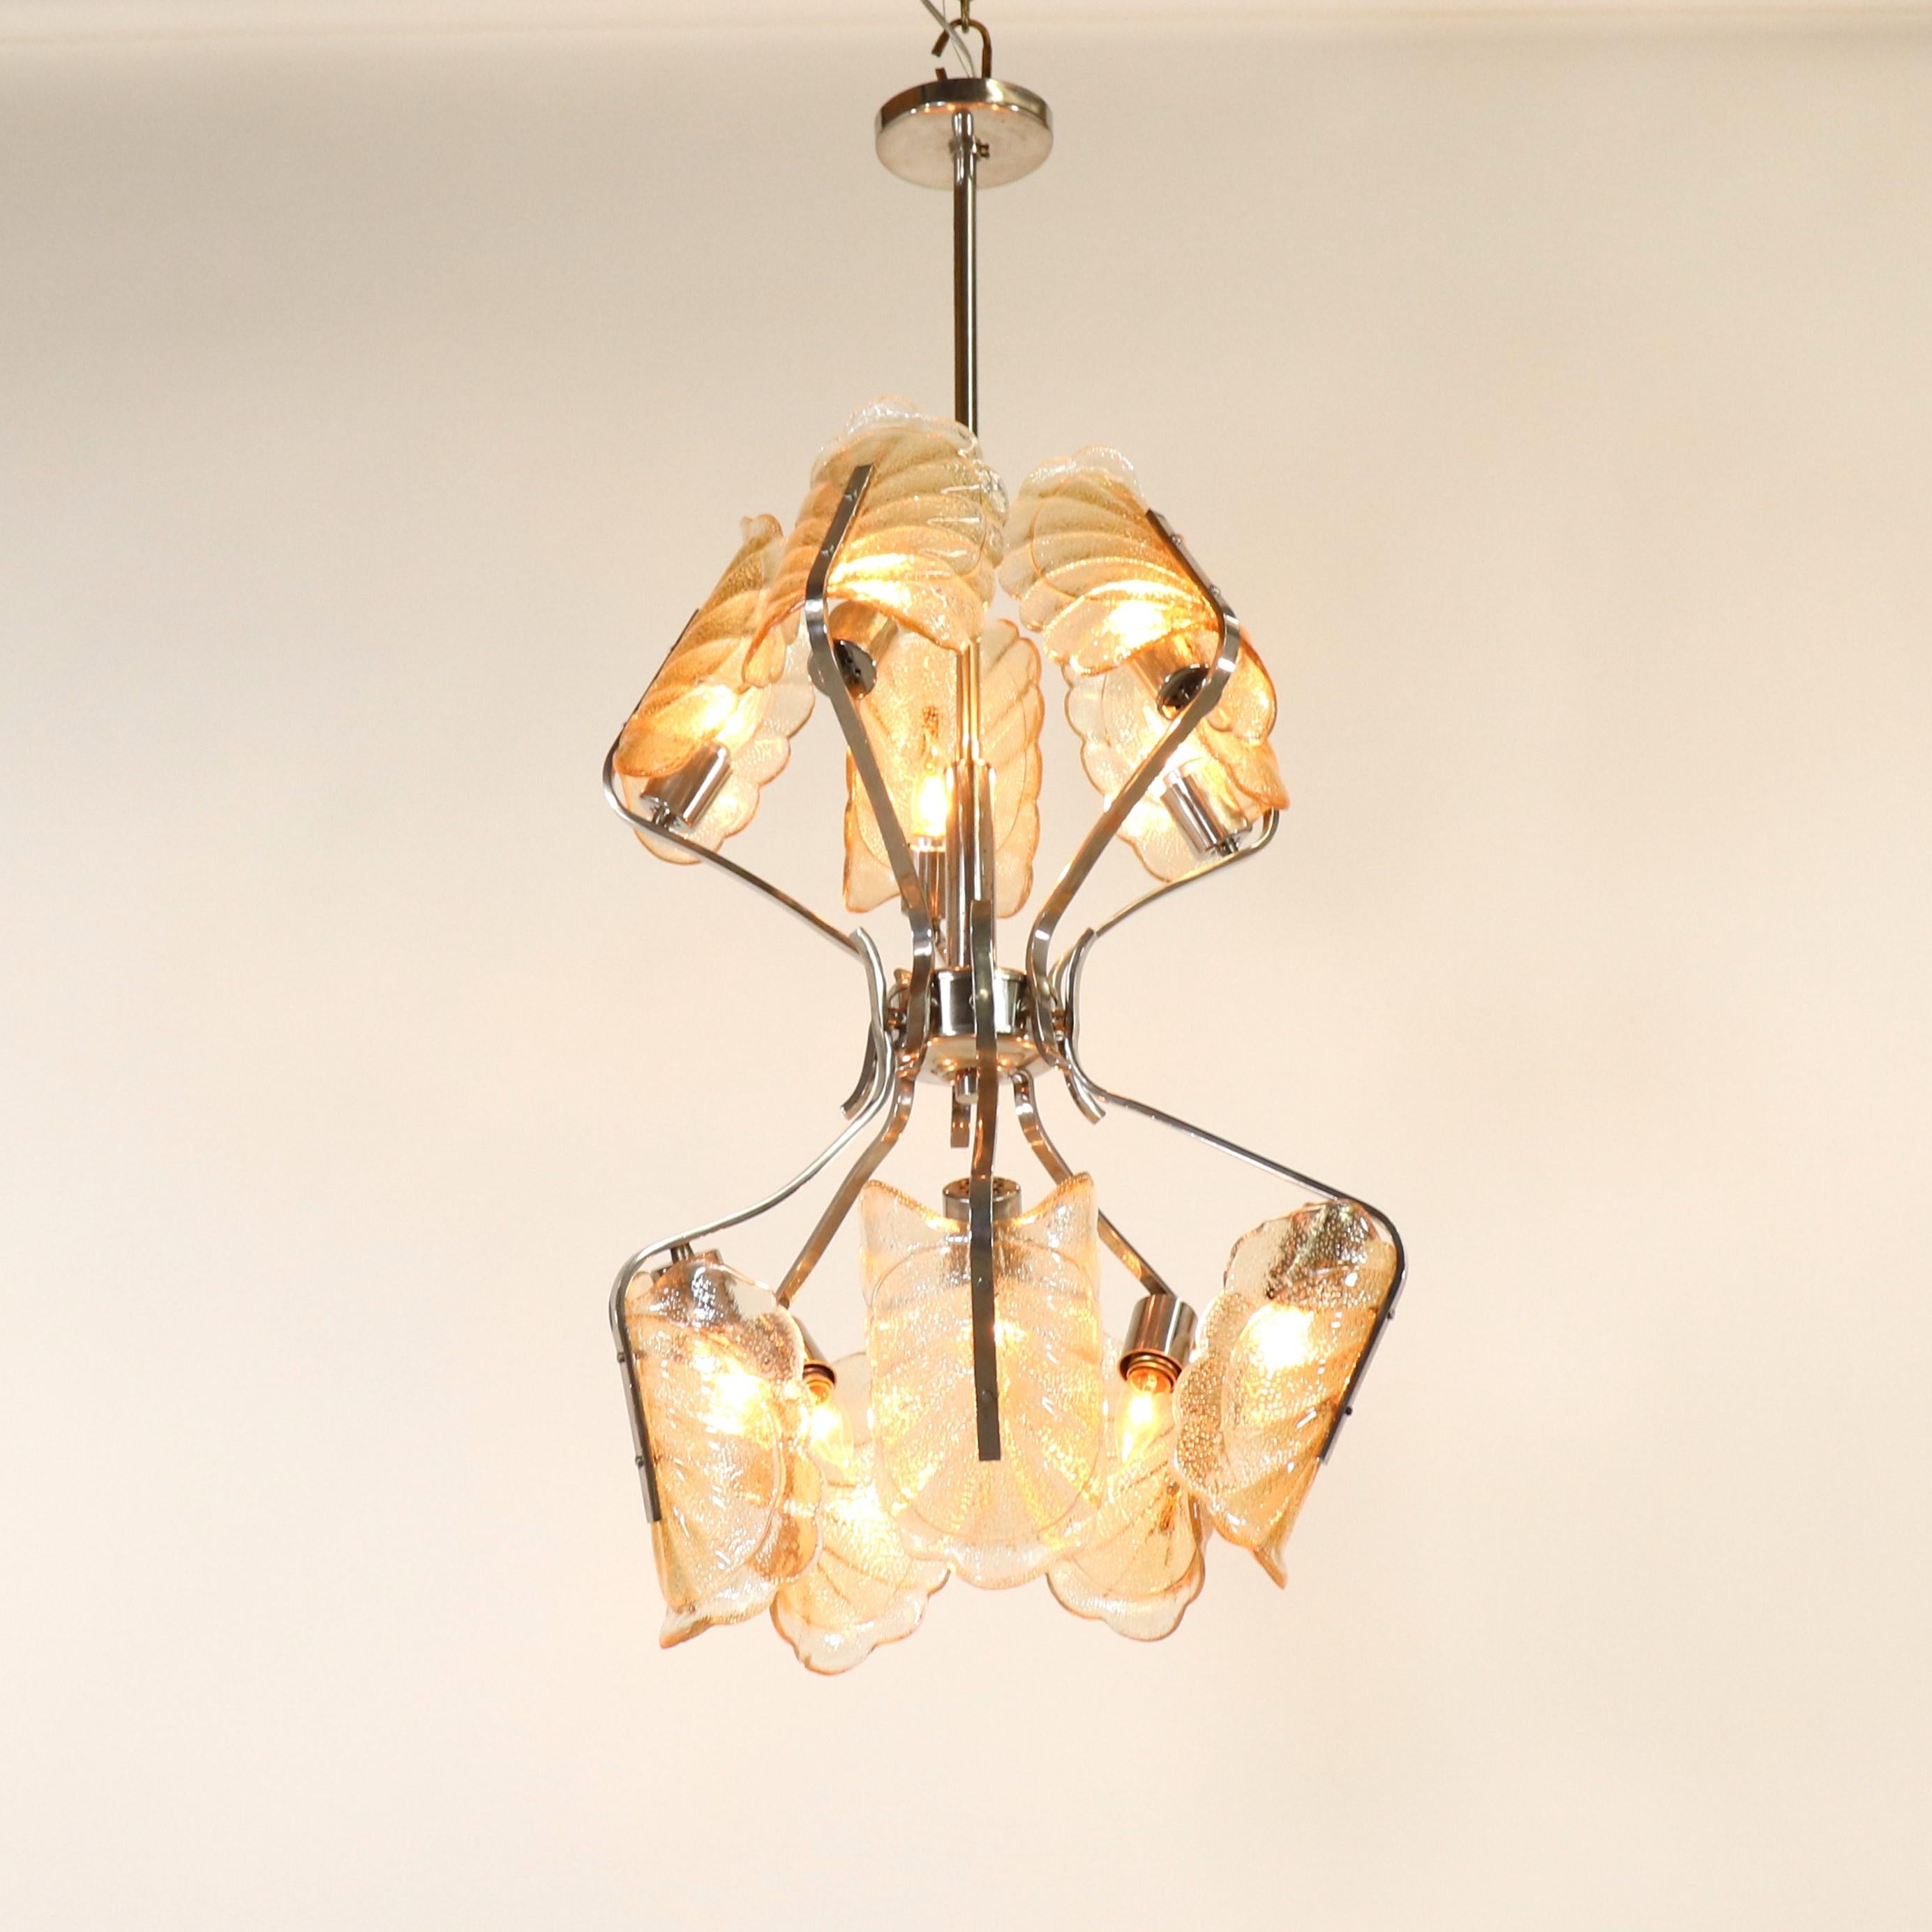 This fascinating mid-century modern two-tier Italian glass chandelier features acanthus leaf shades on a chrome frame. The textured glass shades are enhanced with amber specks dispersed throughout and concentrated on the trim, creating a lush orange